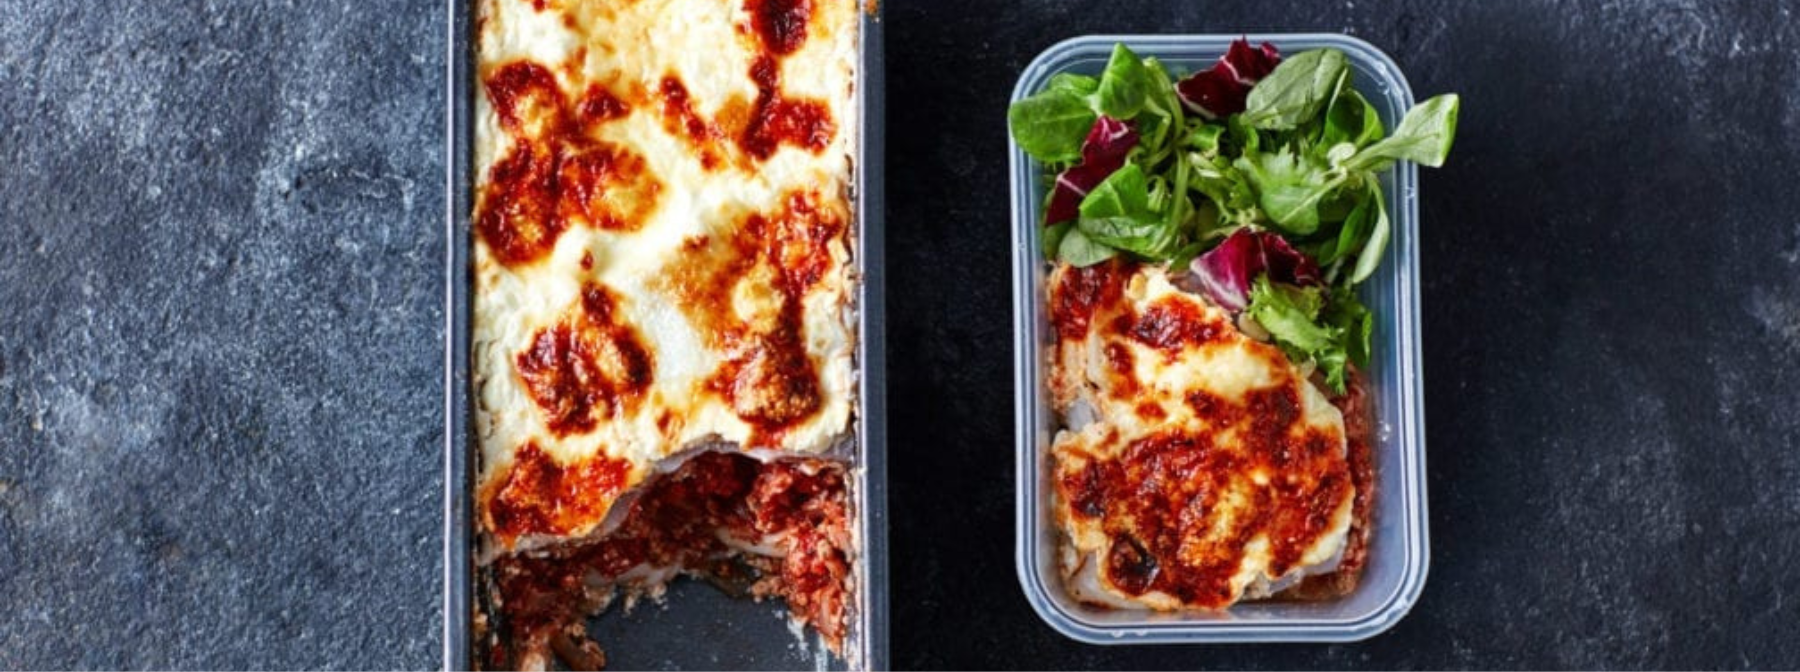 Loaf Tin Lasagna | 4-Day High-Protein Meal Prep